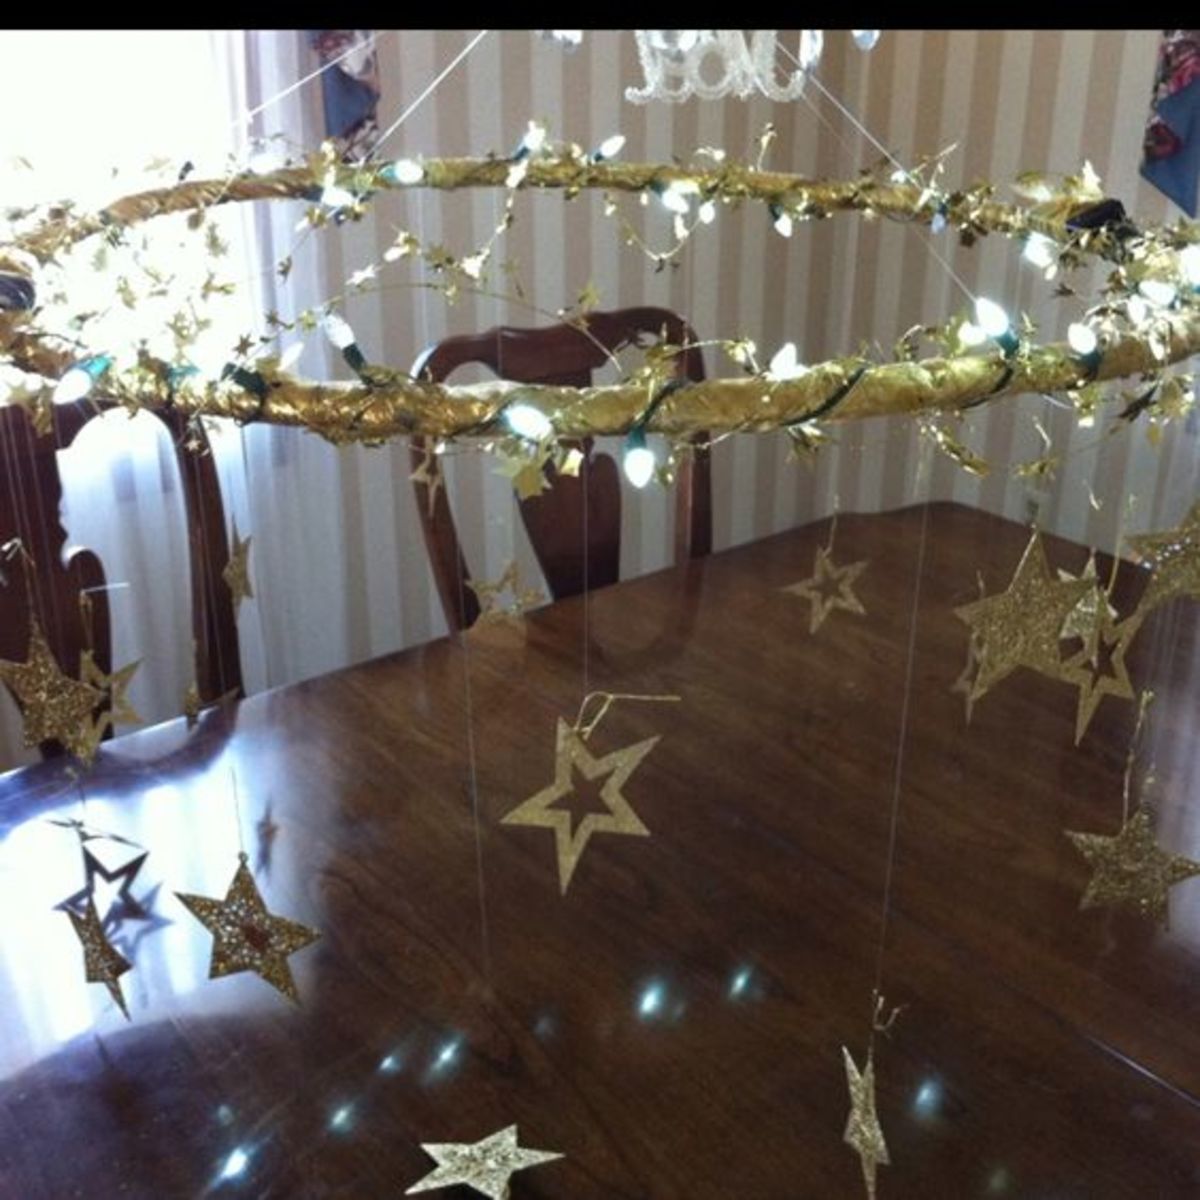 Hula-hoop chandelier for a party!